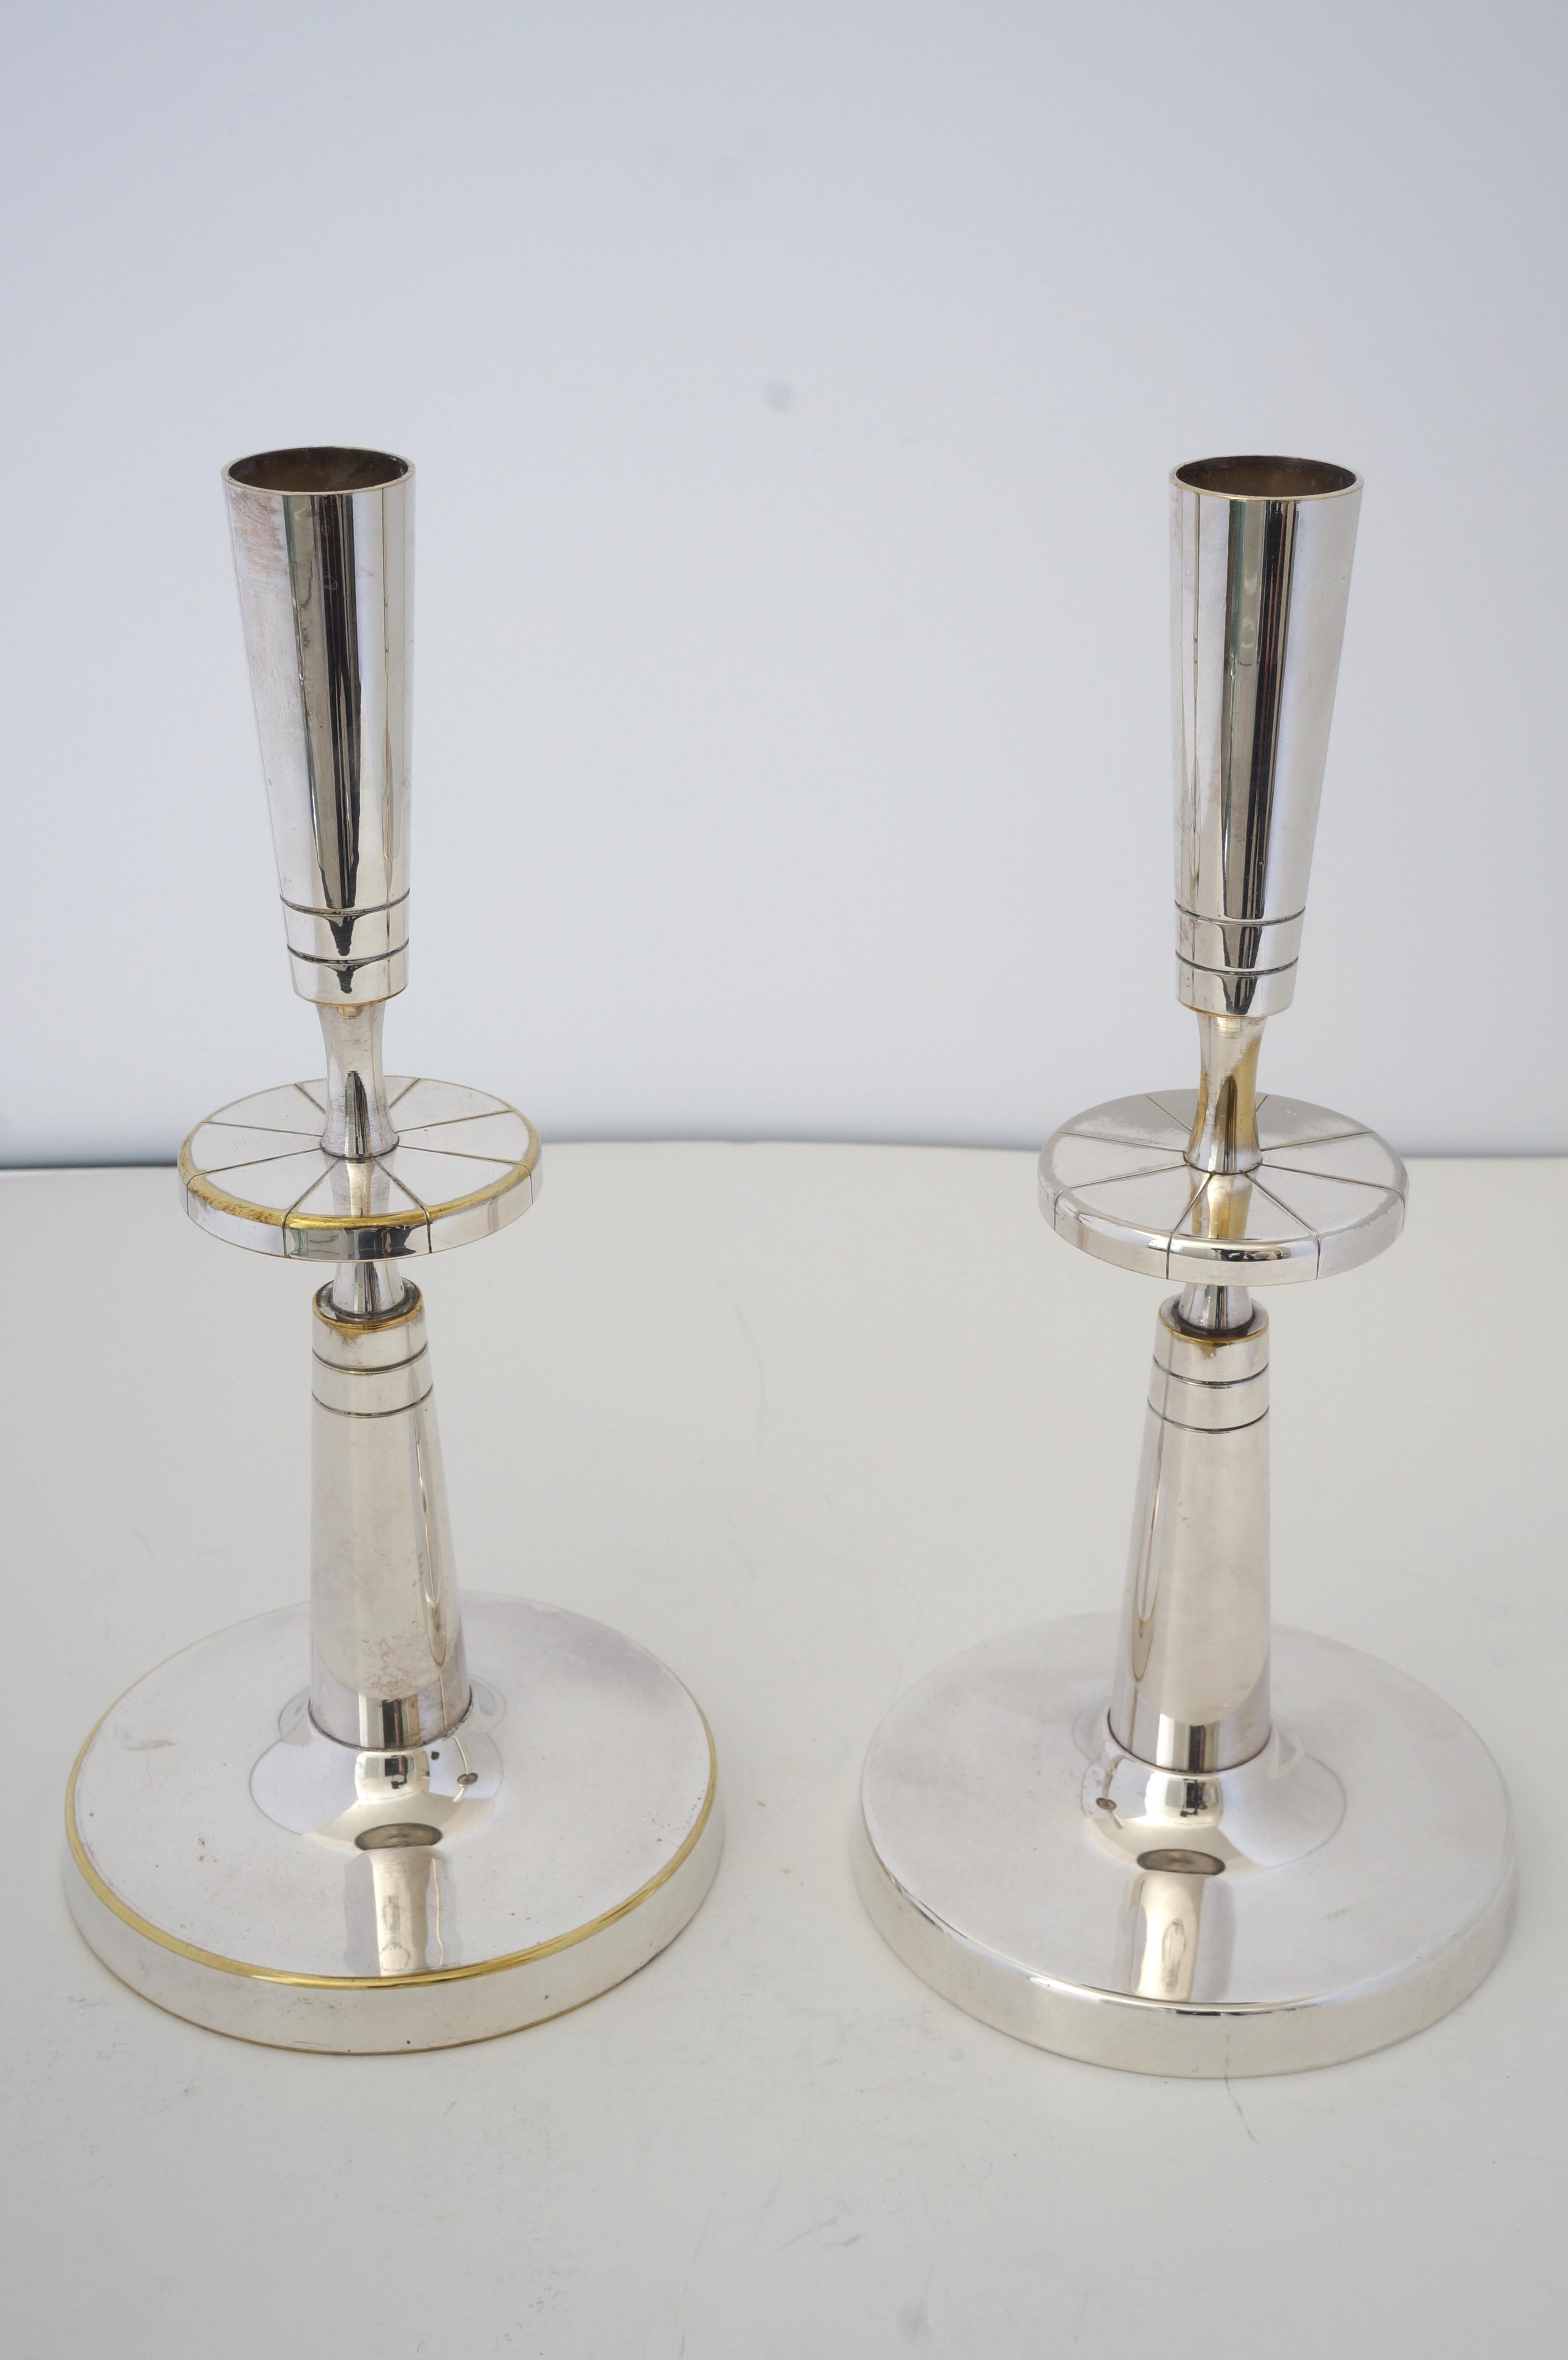 Pair of Silverplate Candlesticks by Tommi Parzinger for Mueck-Cary 1